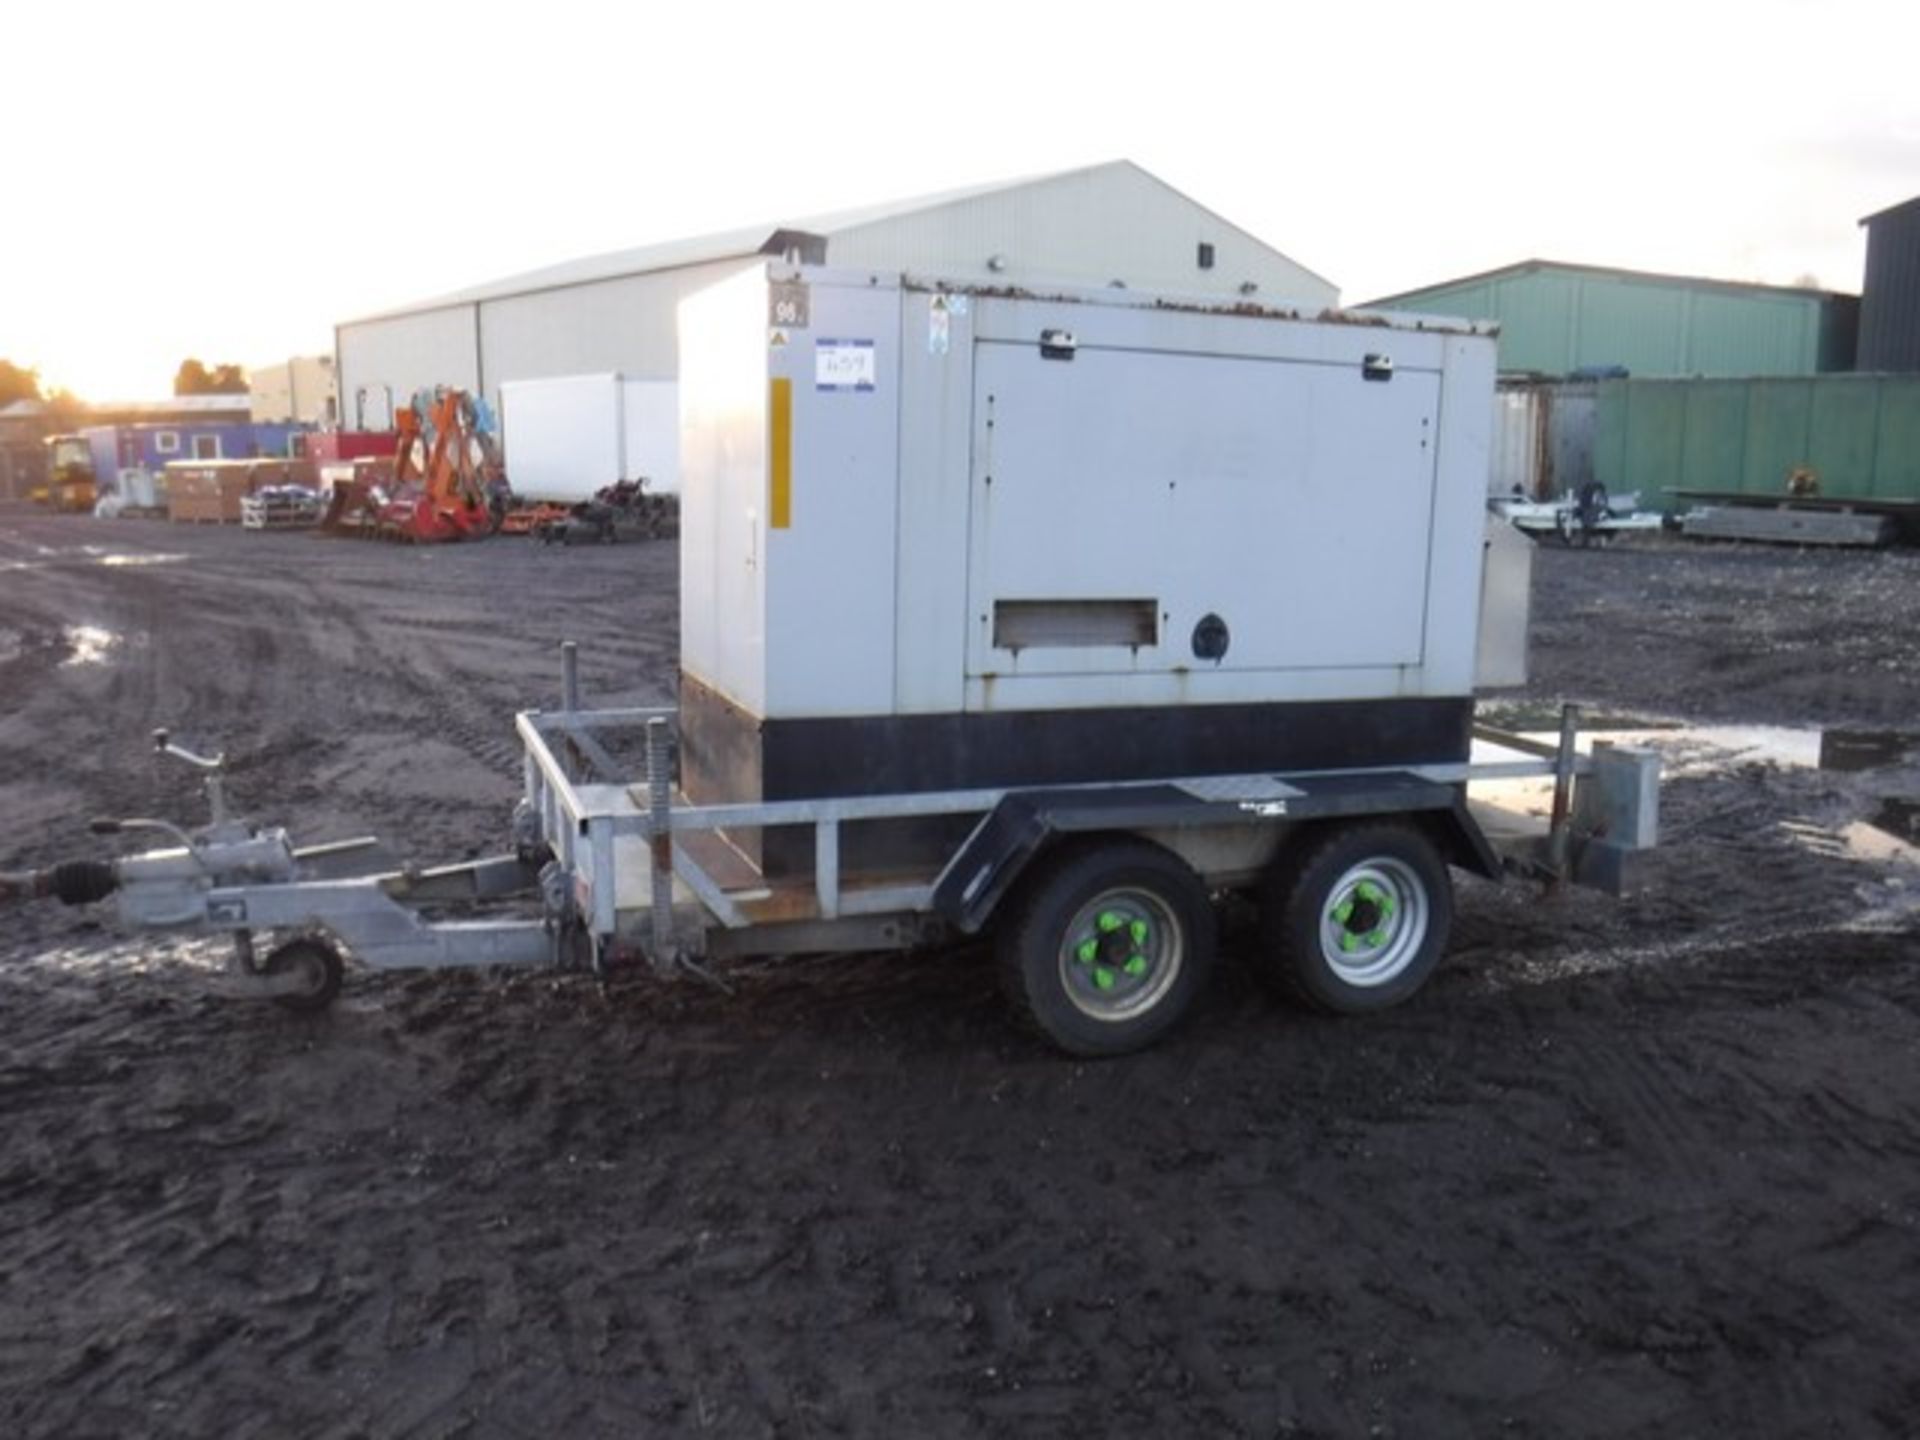 FG WILSON LCH 60 KVA generator on twin axle trailer ID 60.15 S/N FGWPEP03LD-OA11893. 1194hrs. Asset